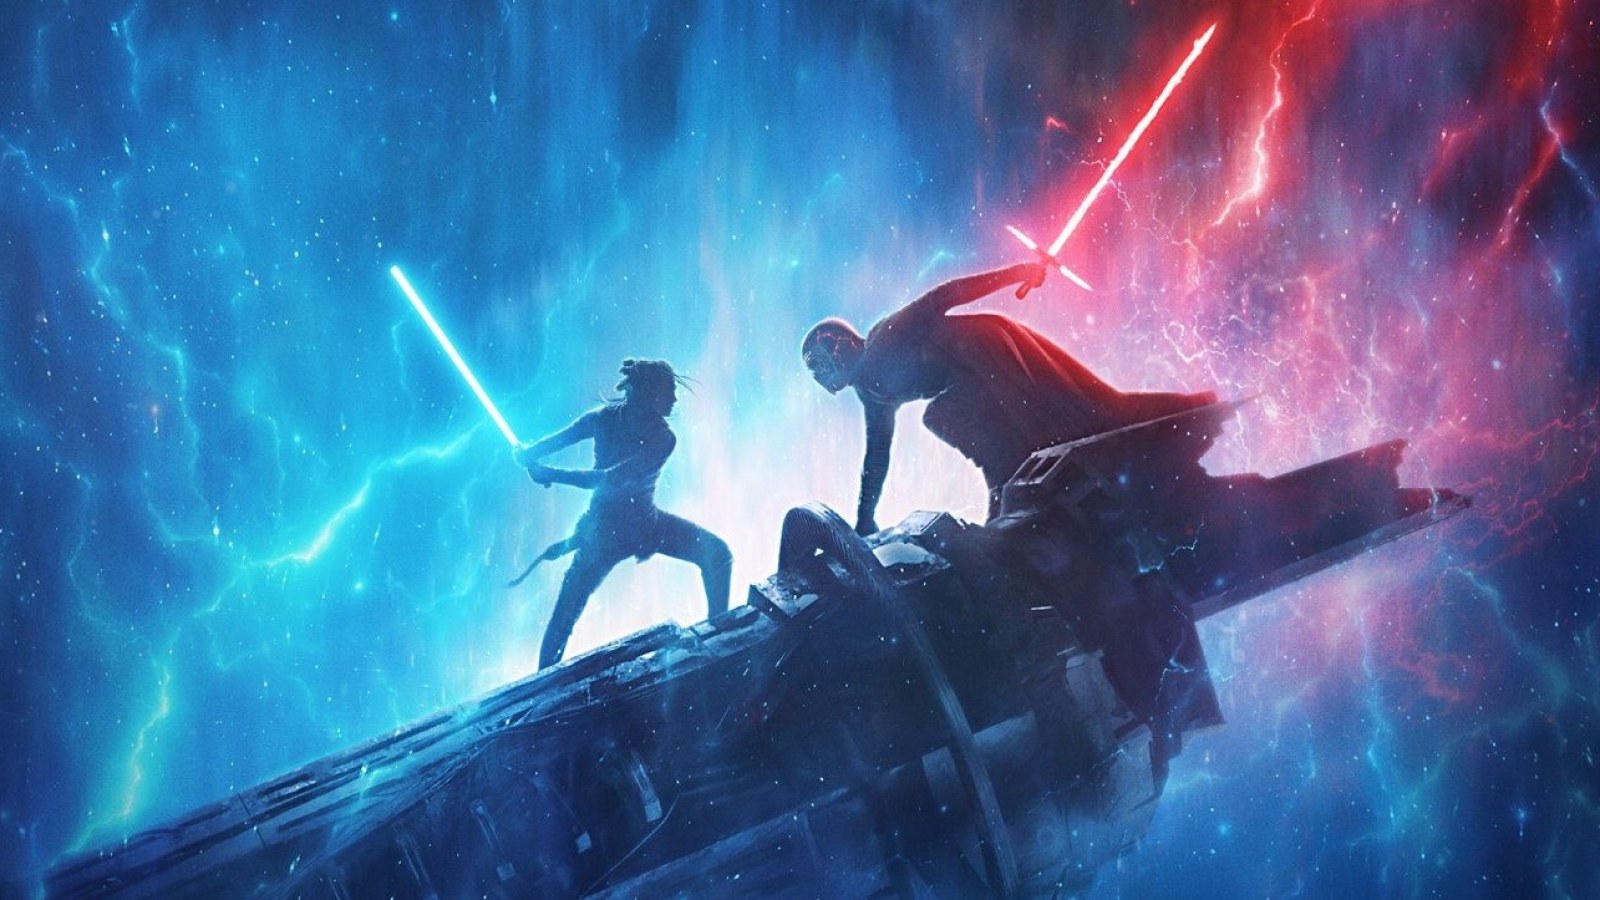 Star Wars Day 2020: The Rise of Skywalker lands early on Disney+ - Vox